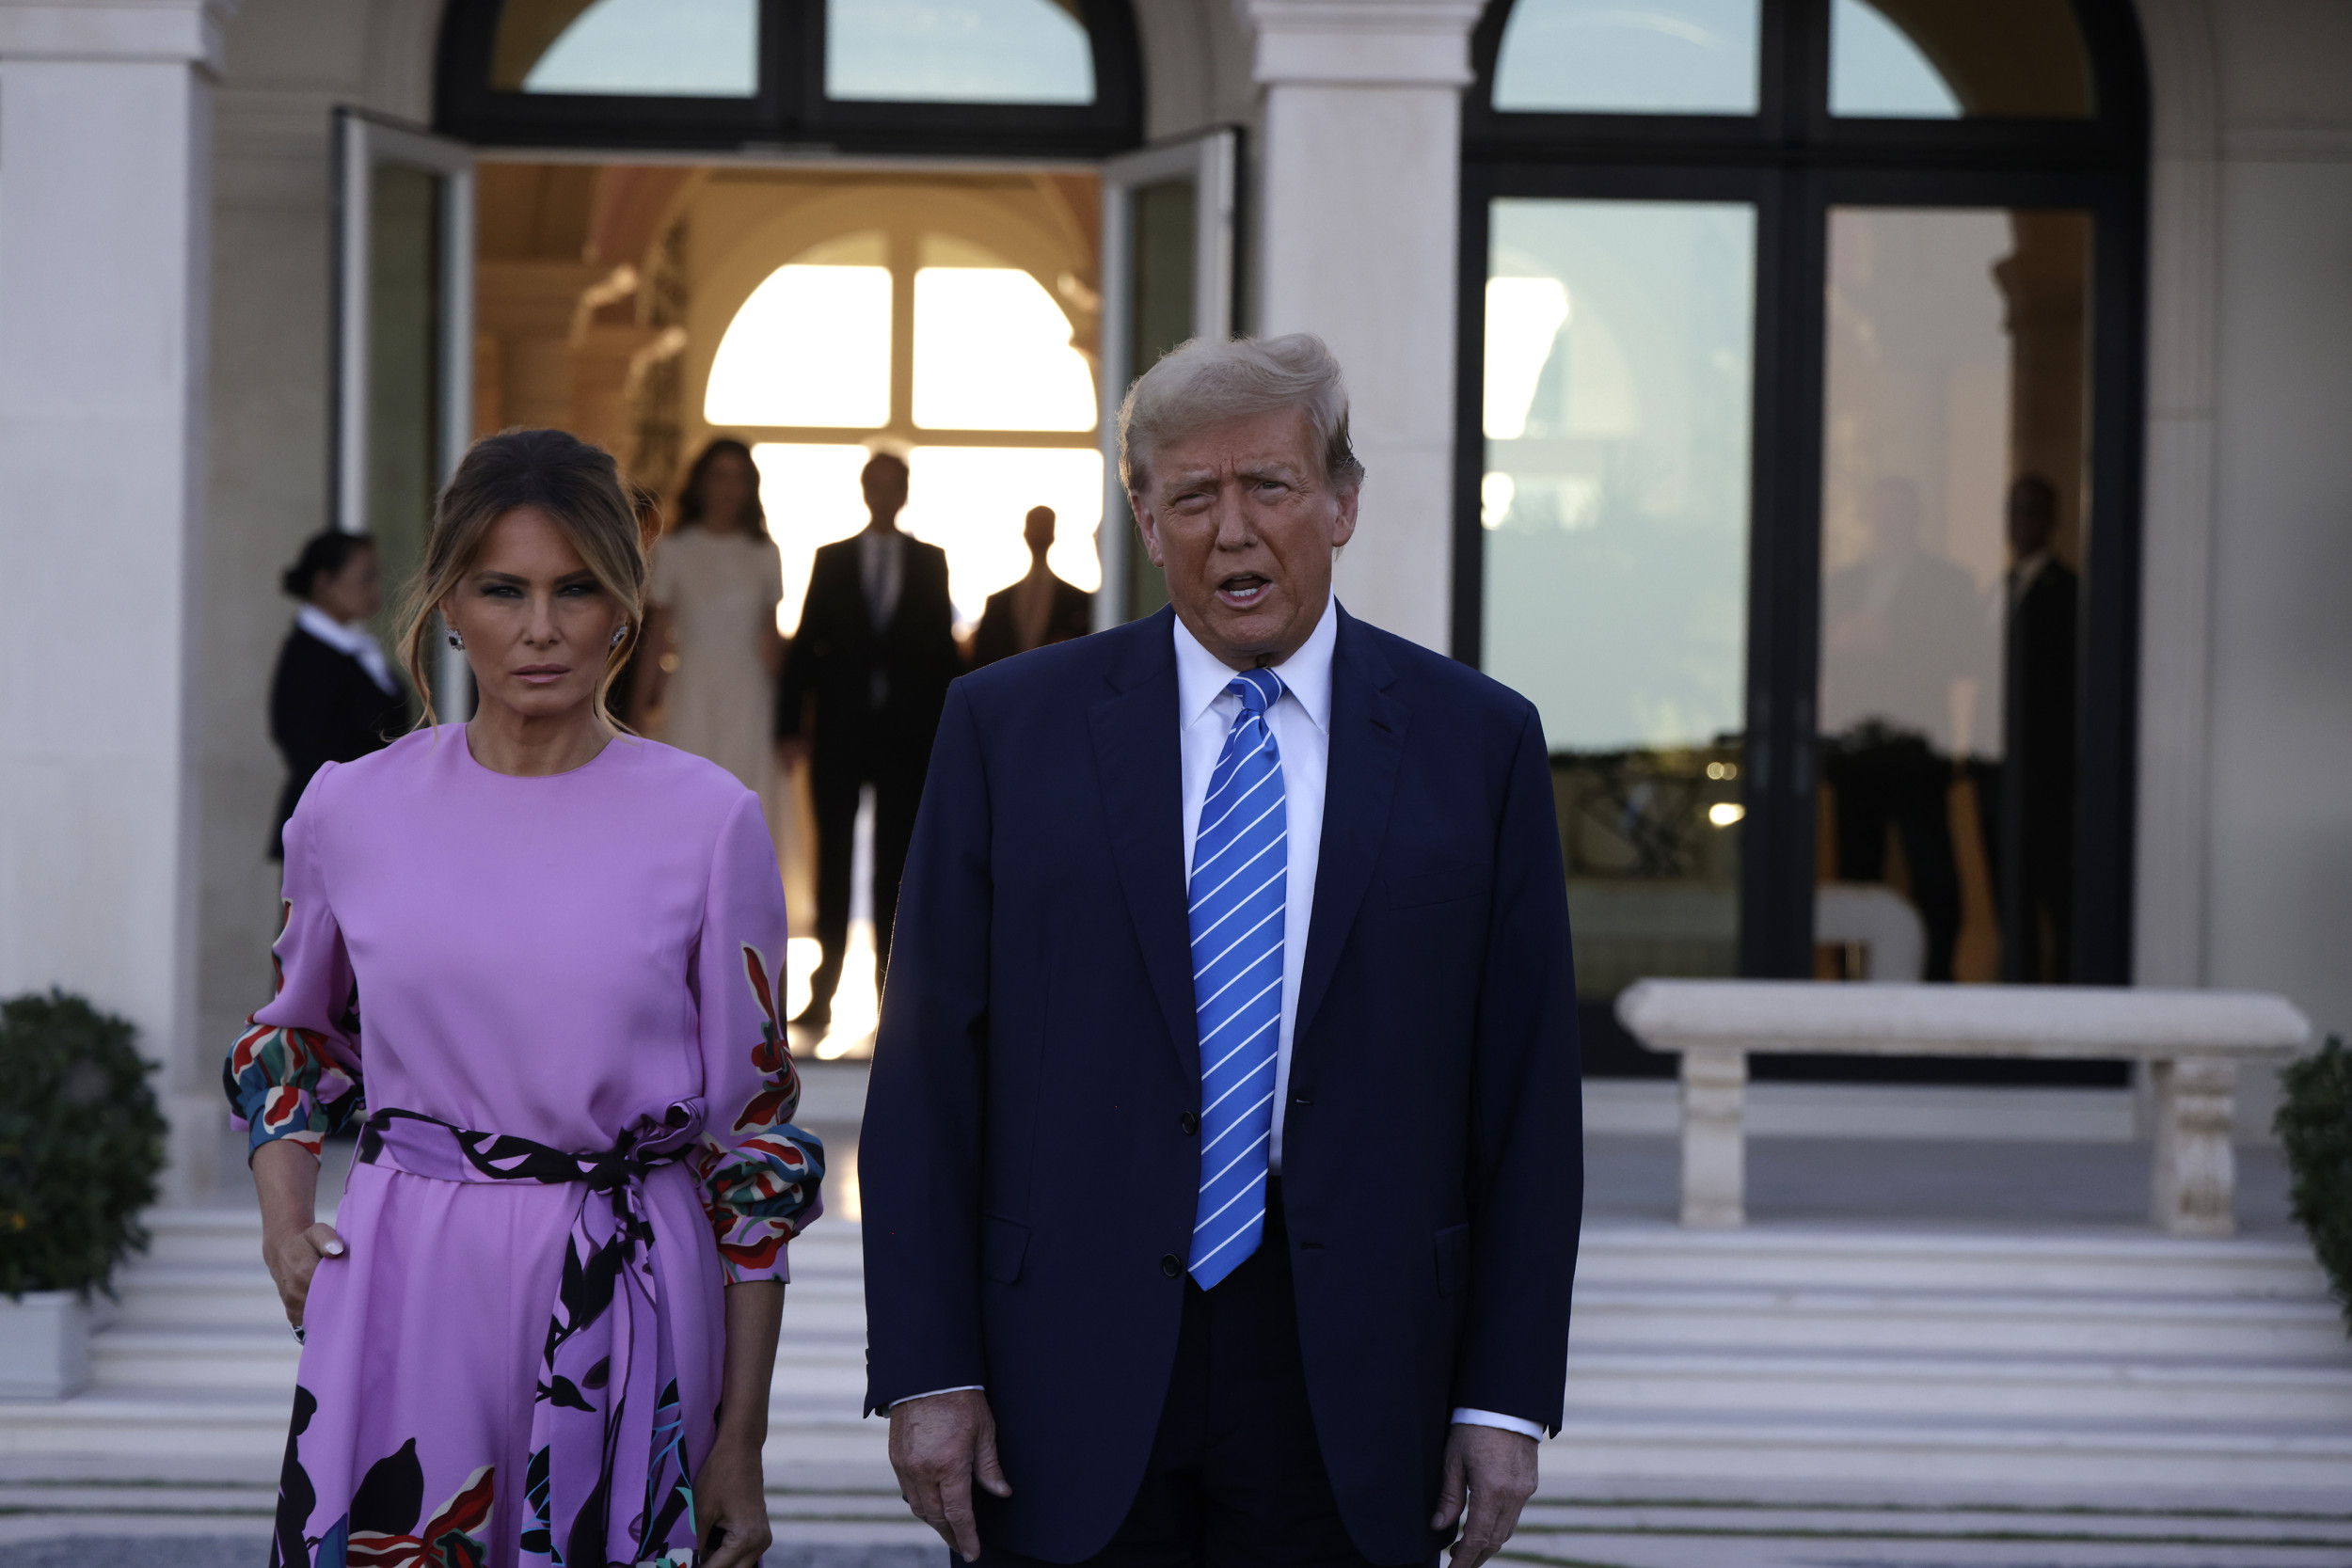 Melania’s appearance with Donald Trump sparks mockery: “Checking the clock”